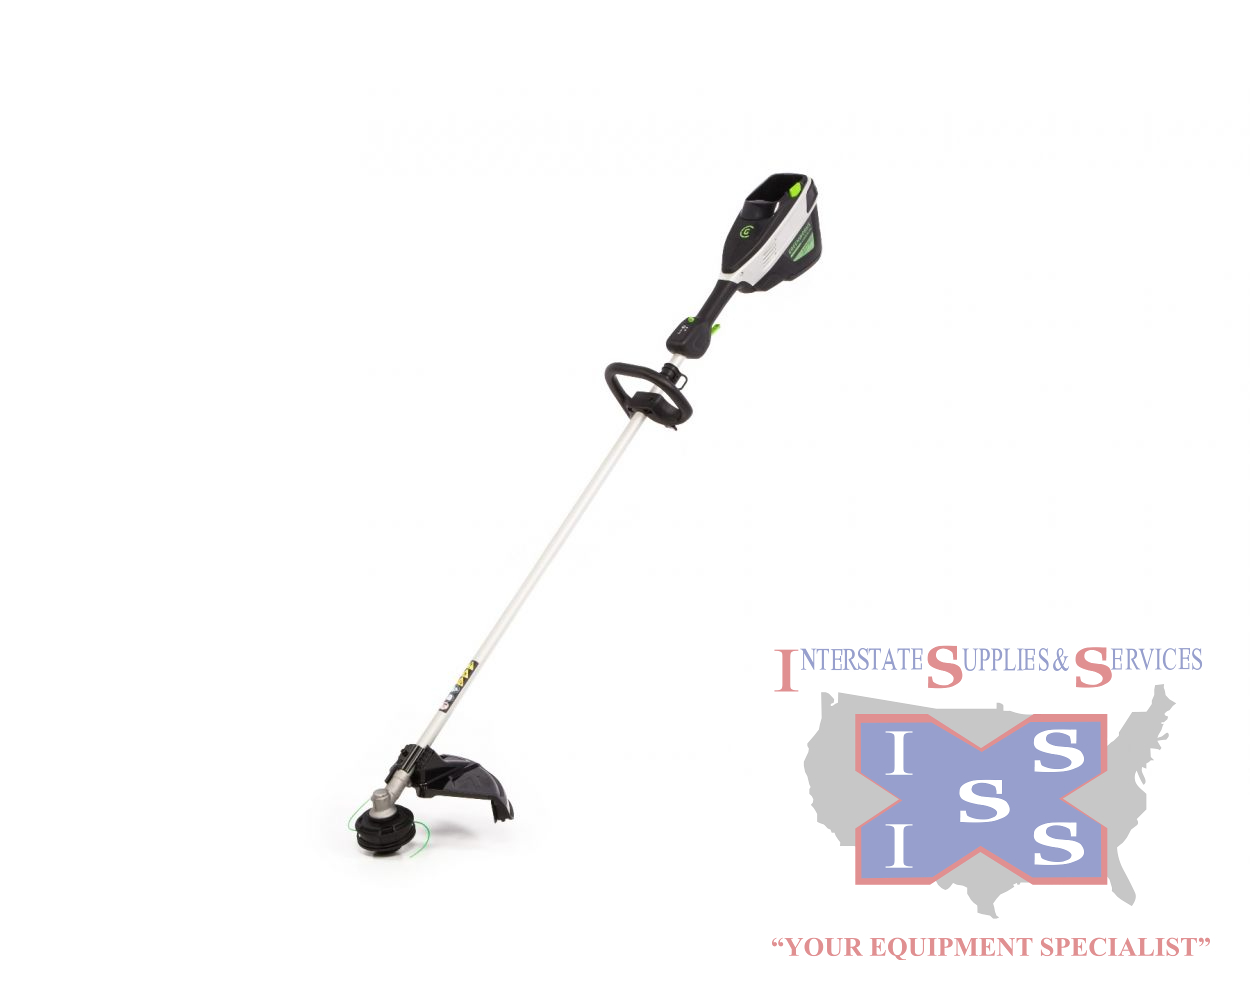 82T16 82-Volt 16" String Trimmer (Tool Only)